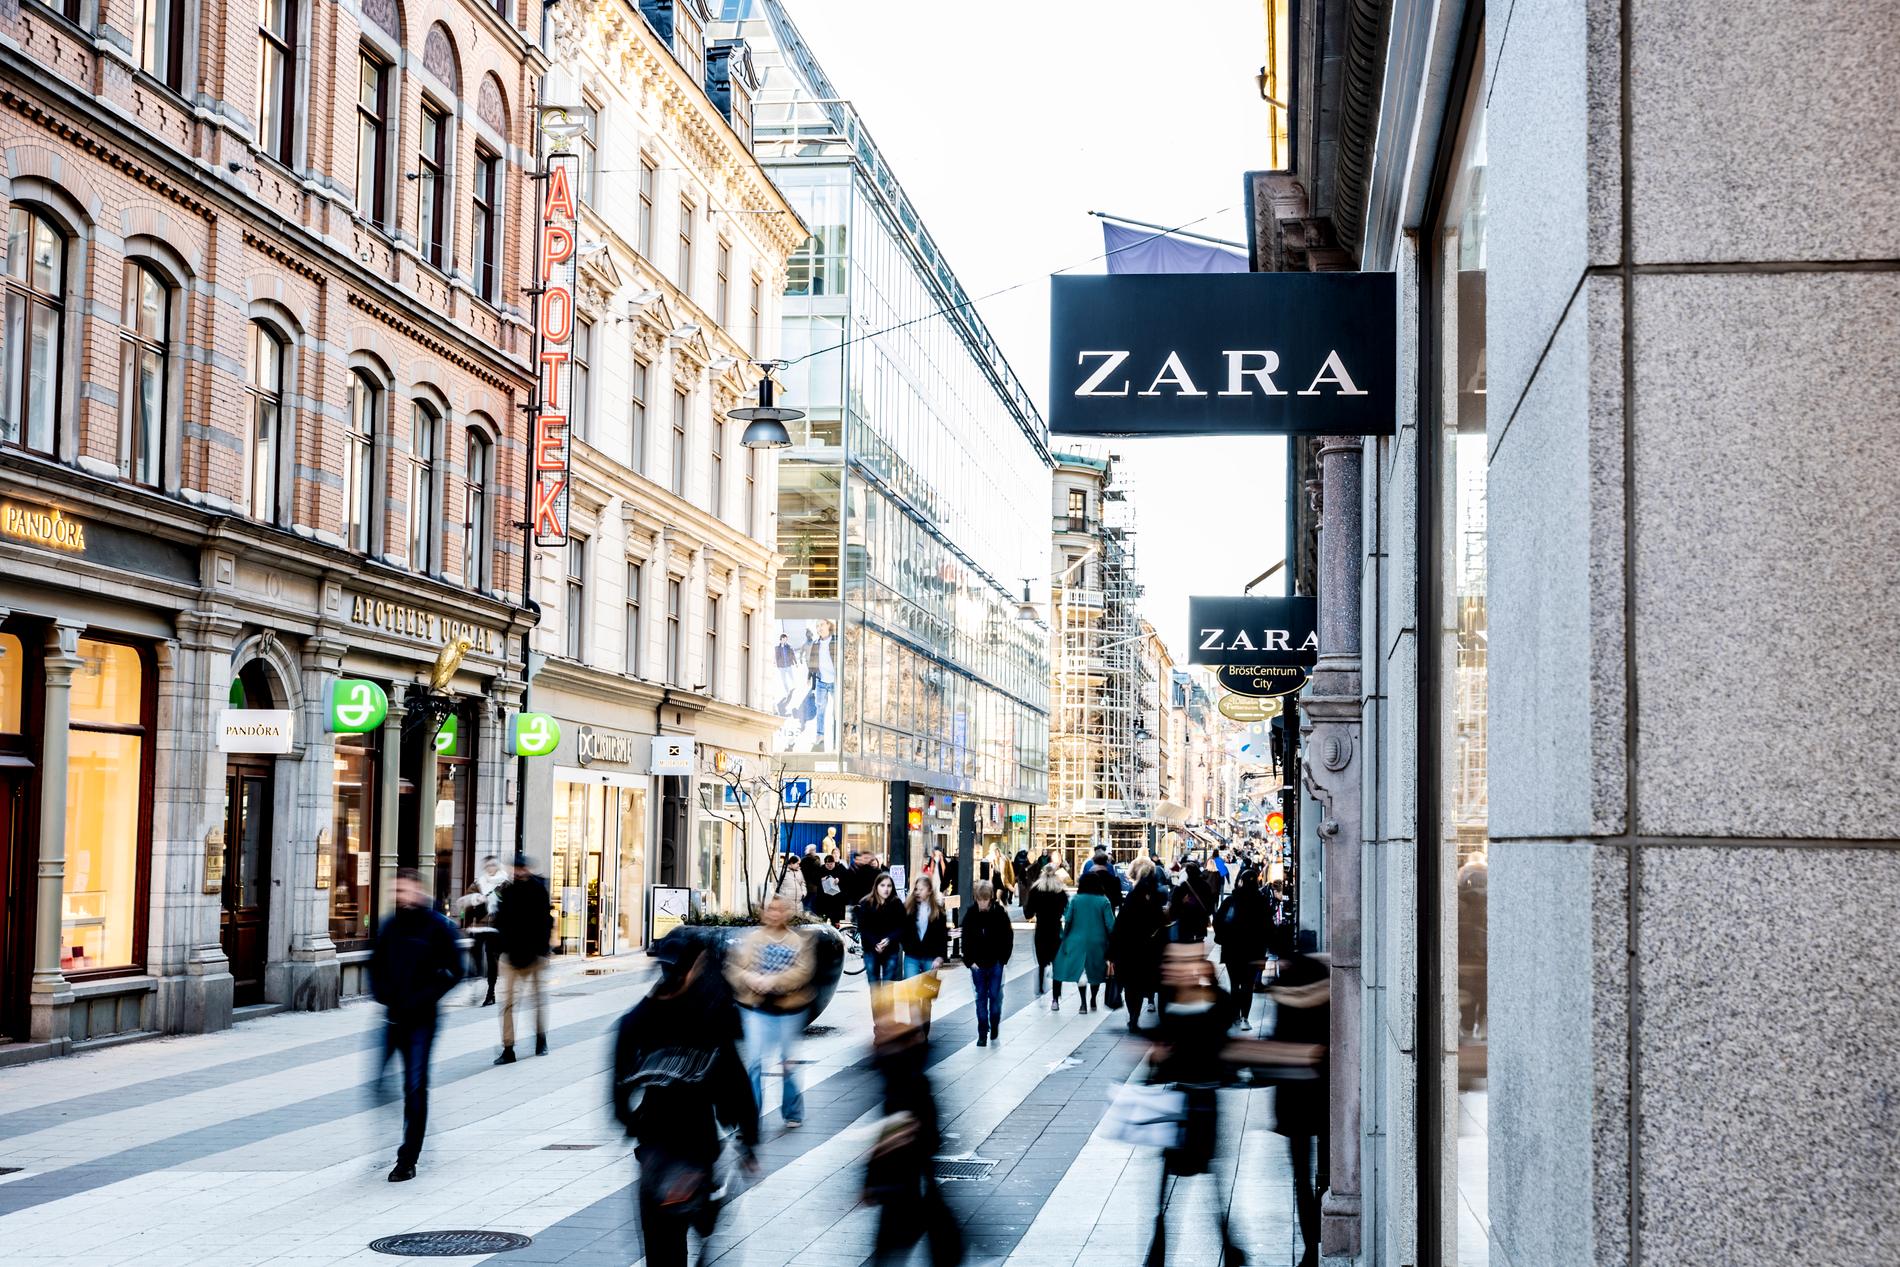 In Sweden, there are 13 Zara stores and 445 employees.